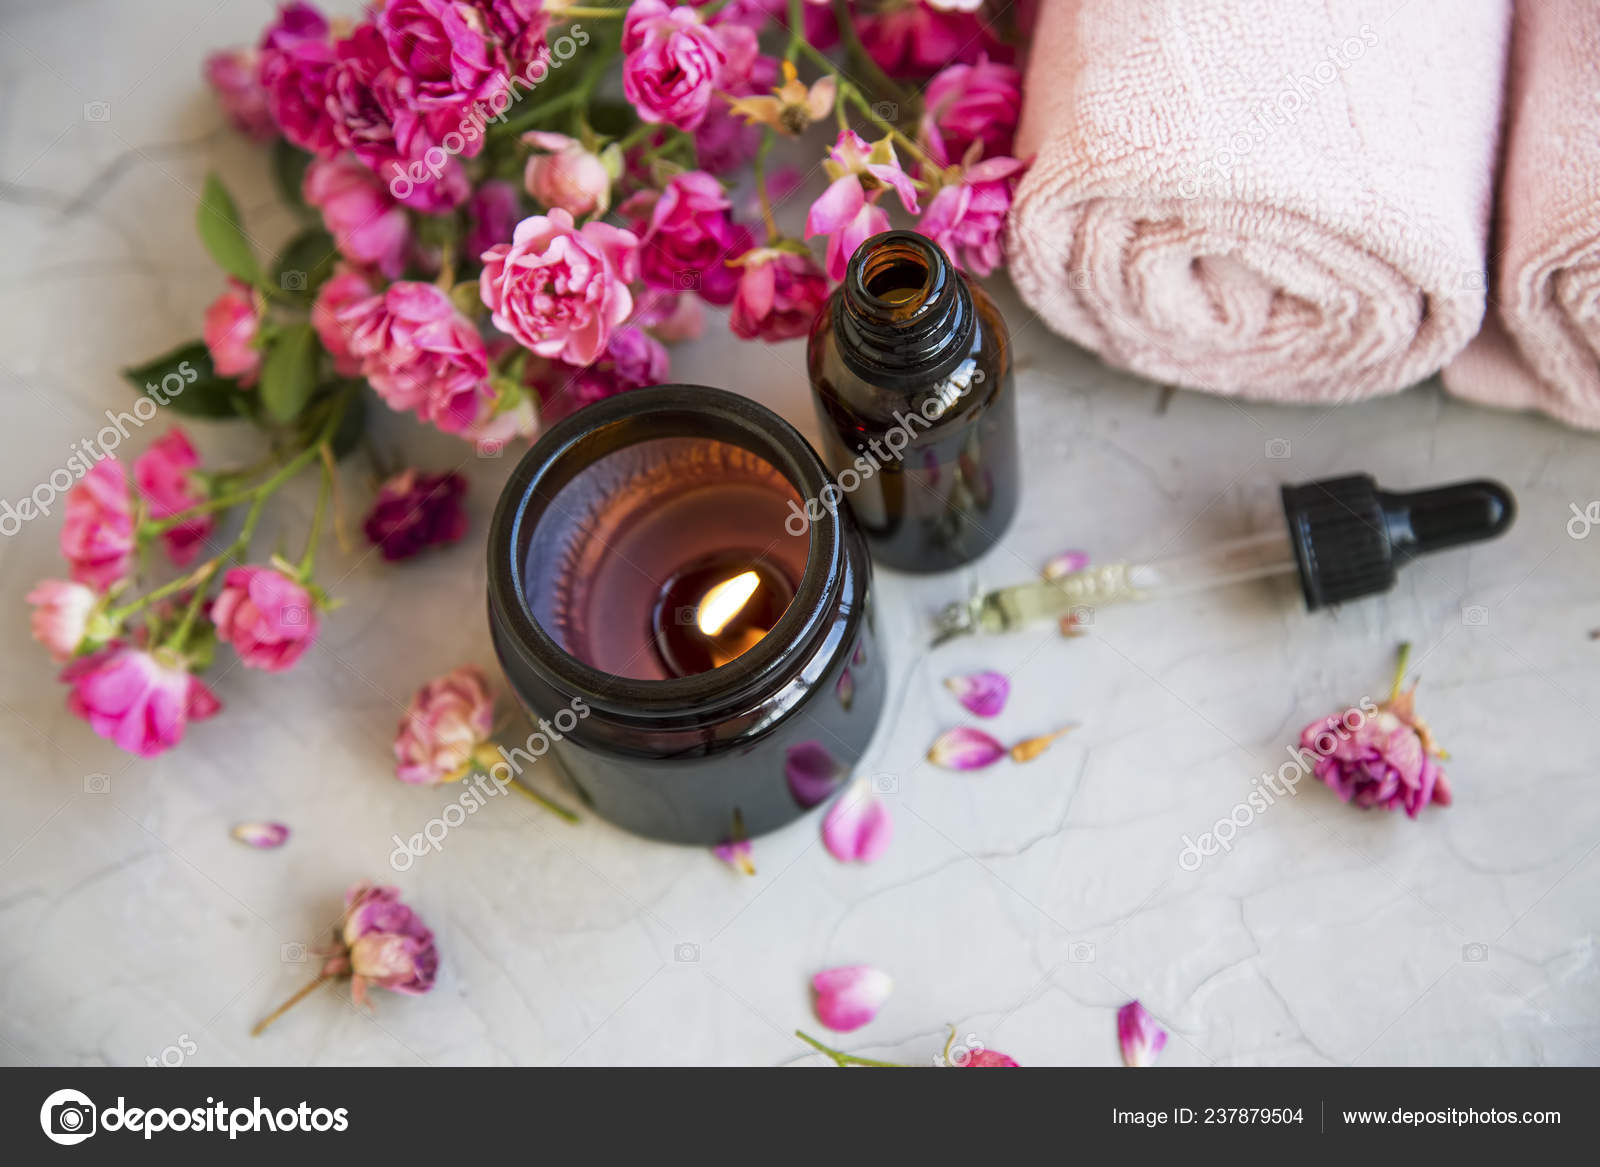 Wellness and Spa: spa accessories, candles, essential oils, and